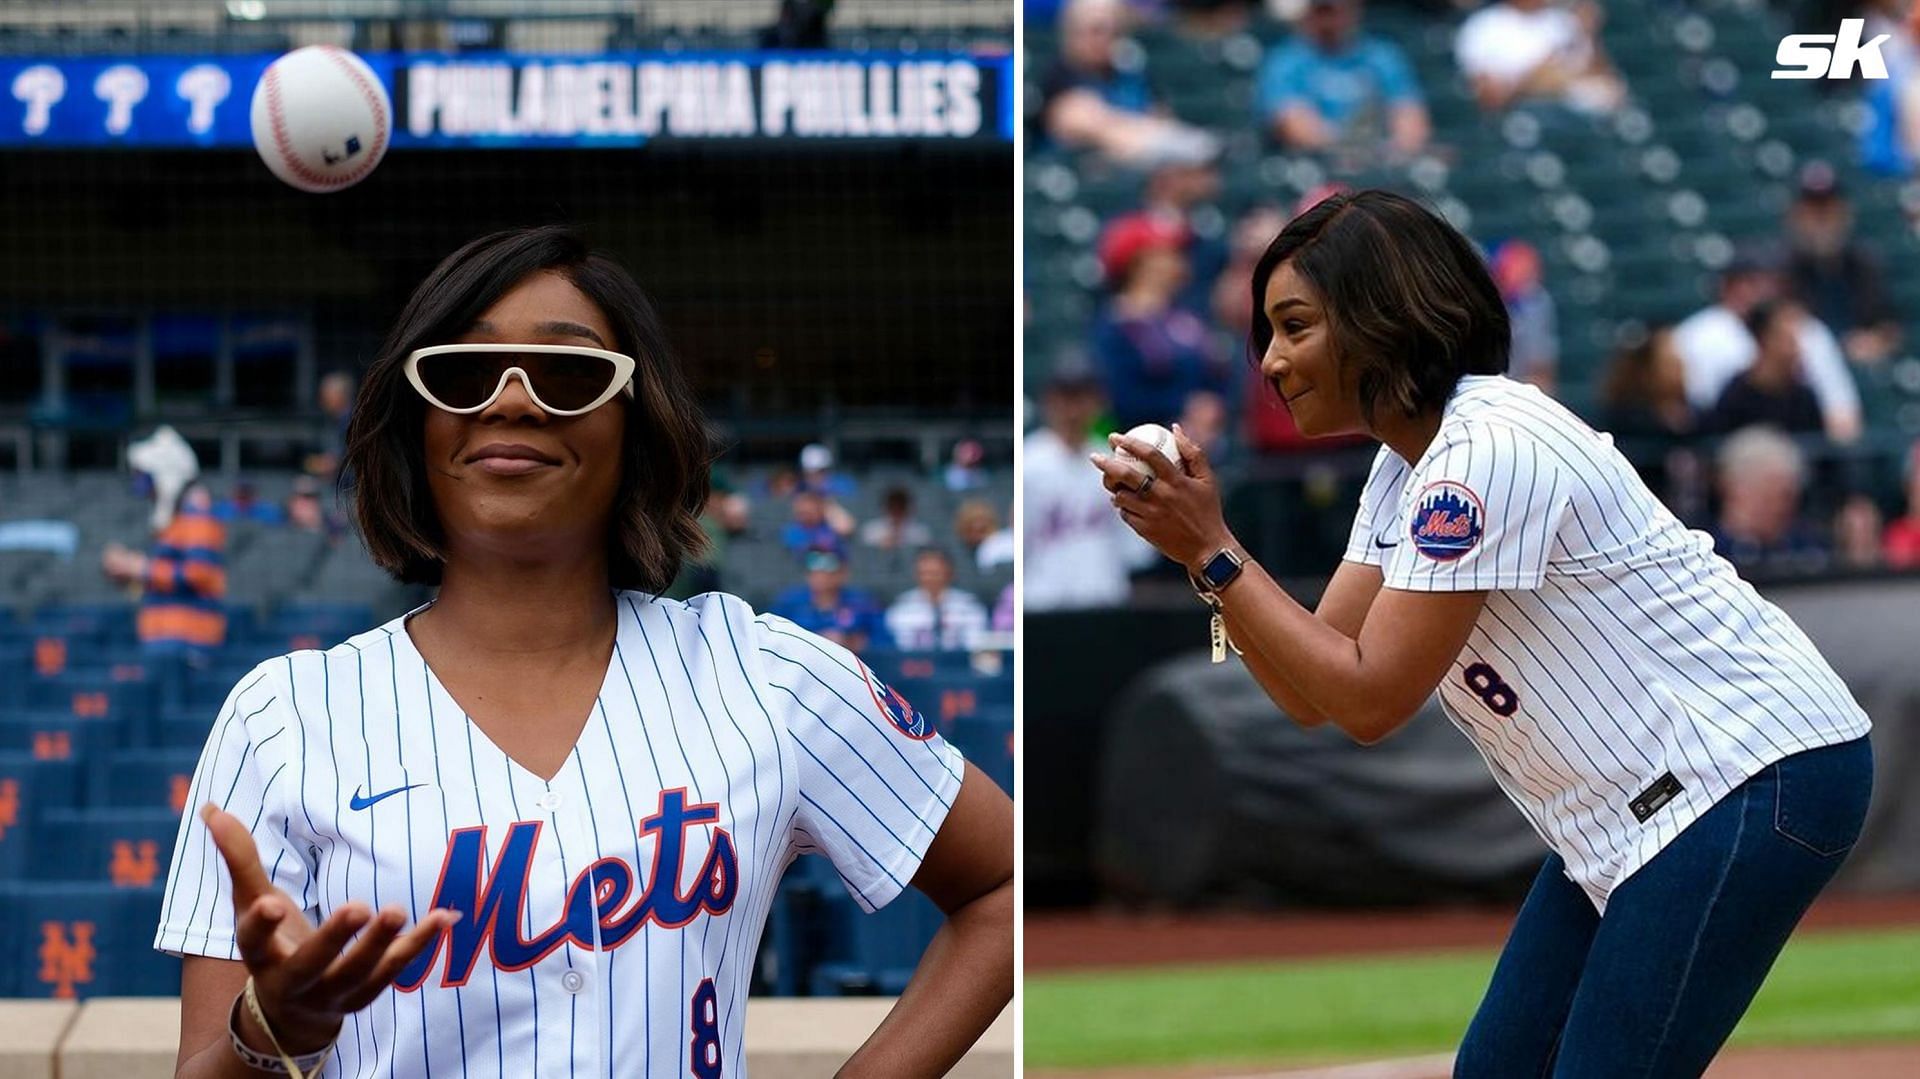 Tiffany Haddish throws out ceremonial first pitch at Citi Field